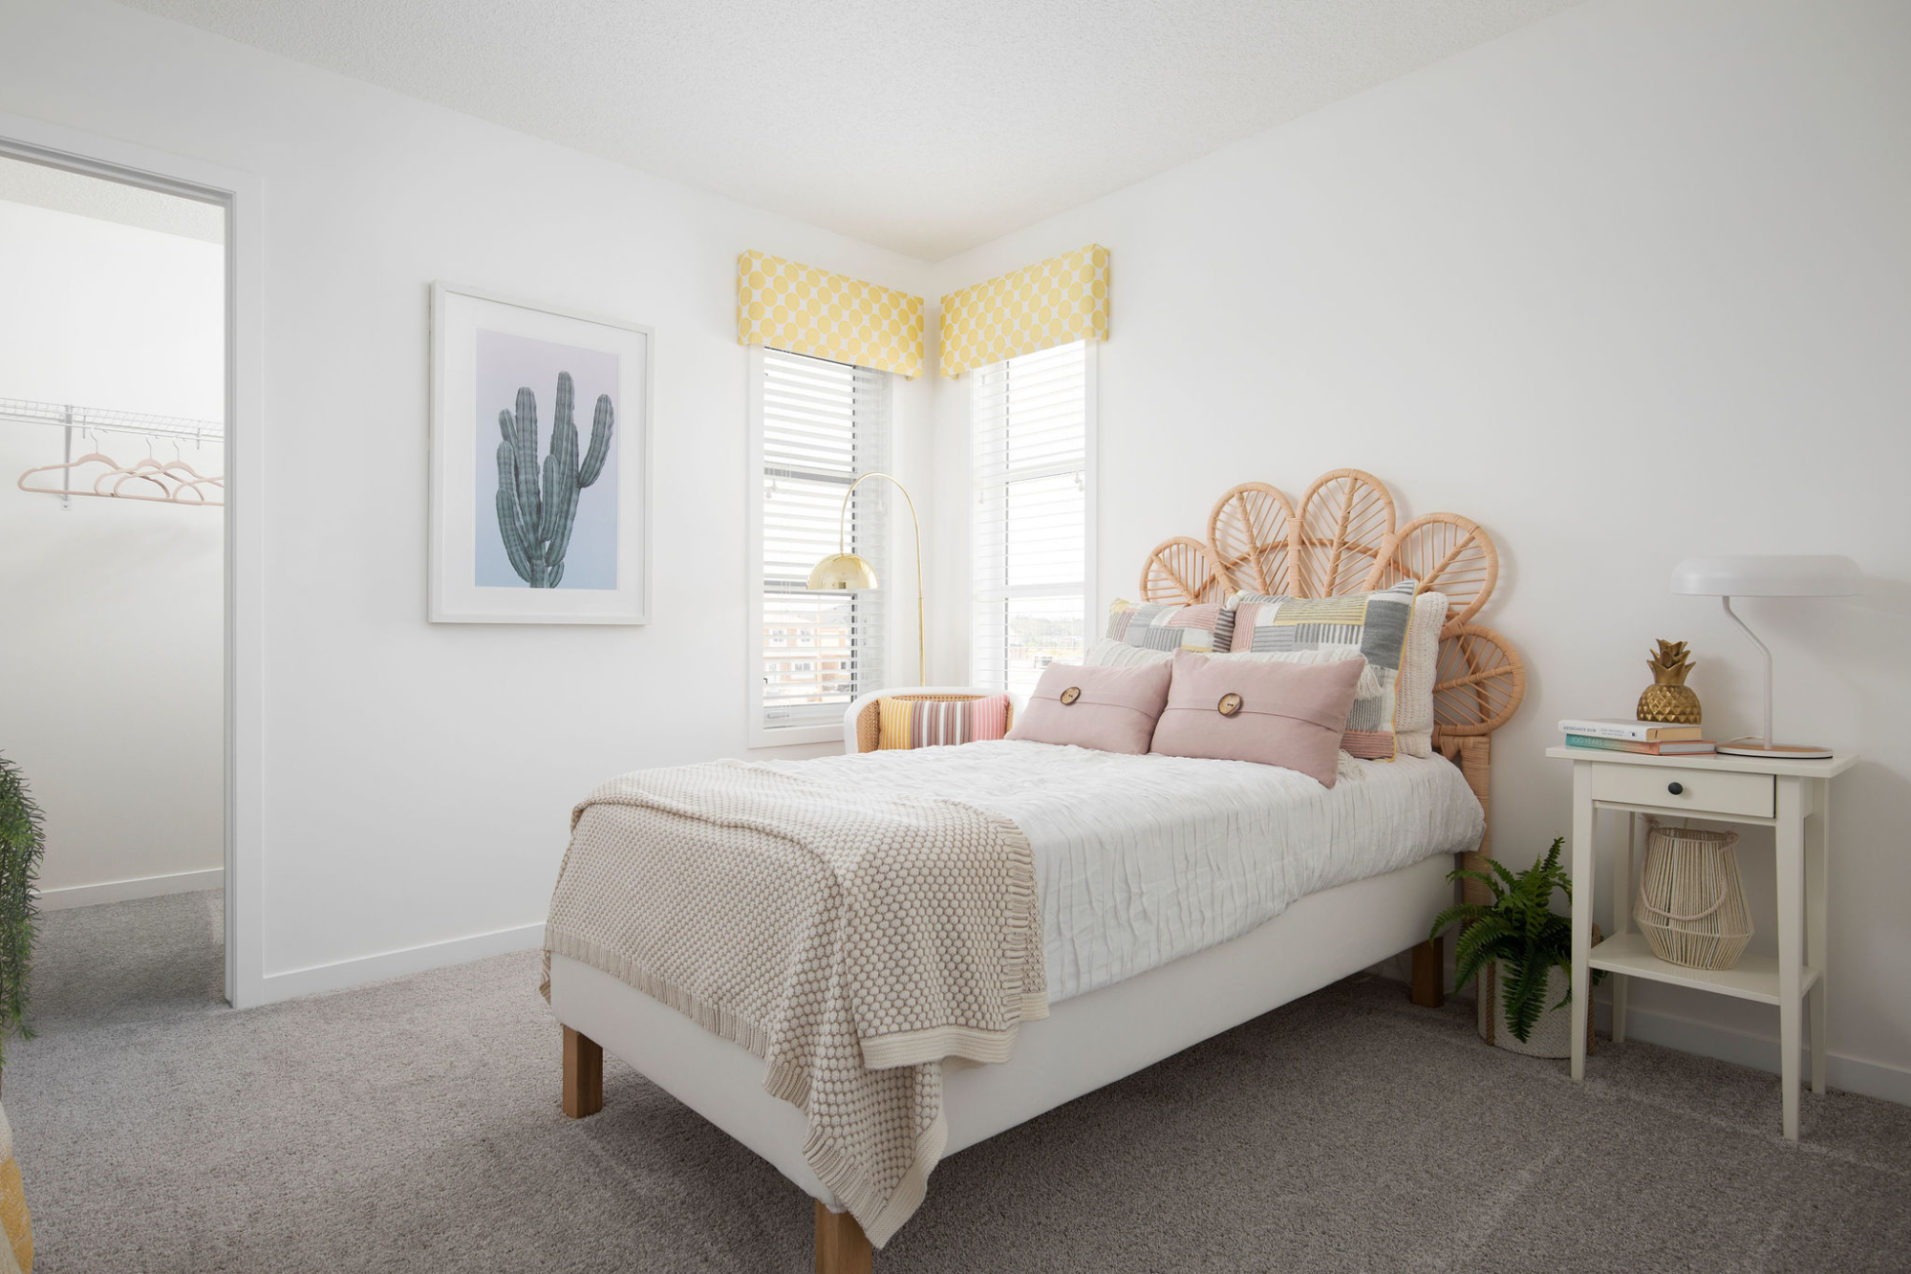 A carpeted bedroom with a child's bed and white walls.